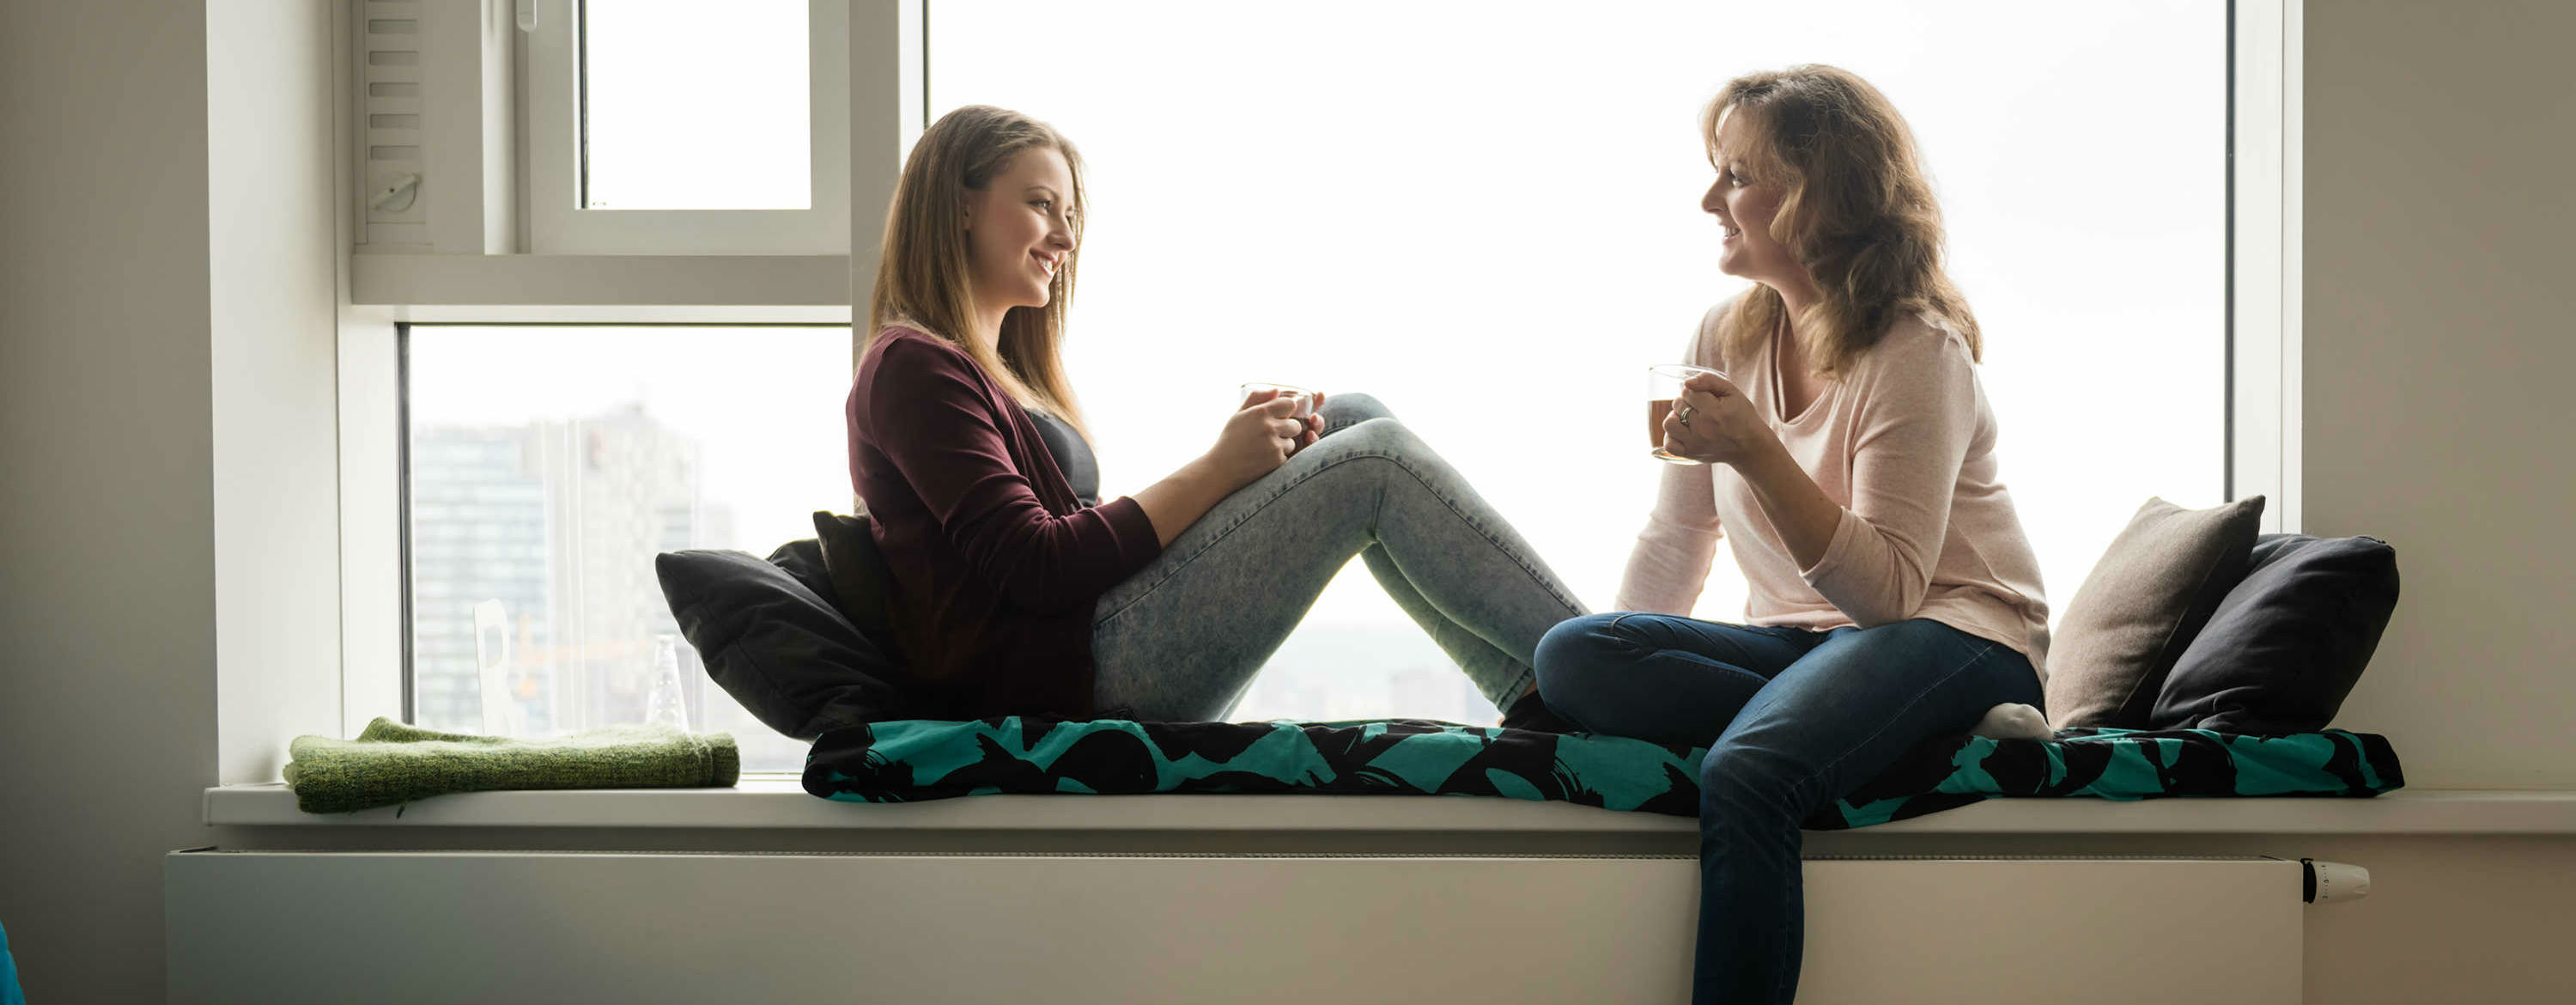 Mother and daughter sitting on a window sill talking to each other.